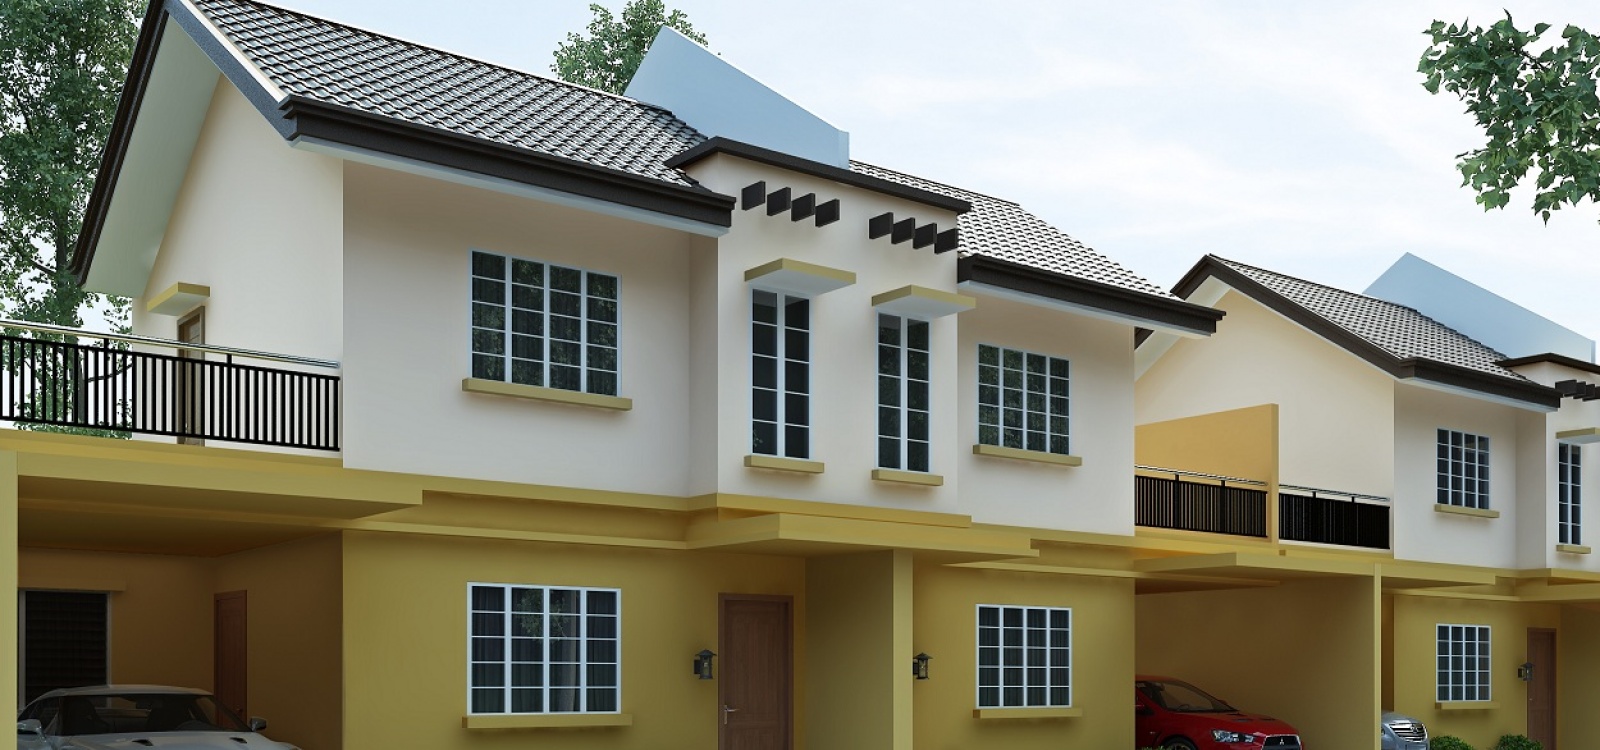 5 Bedrooms, House, For sale, Listing ID 1006, Cebu, Philippines,